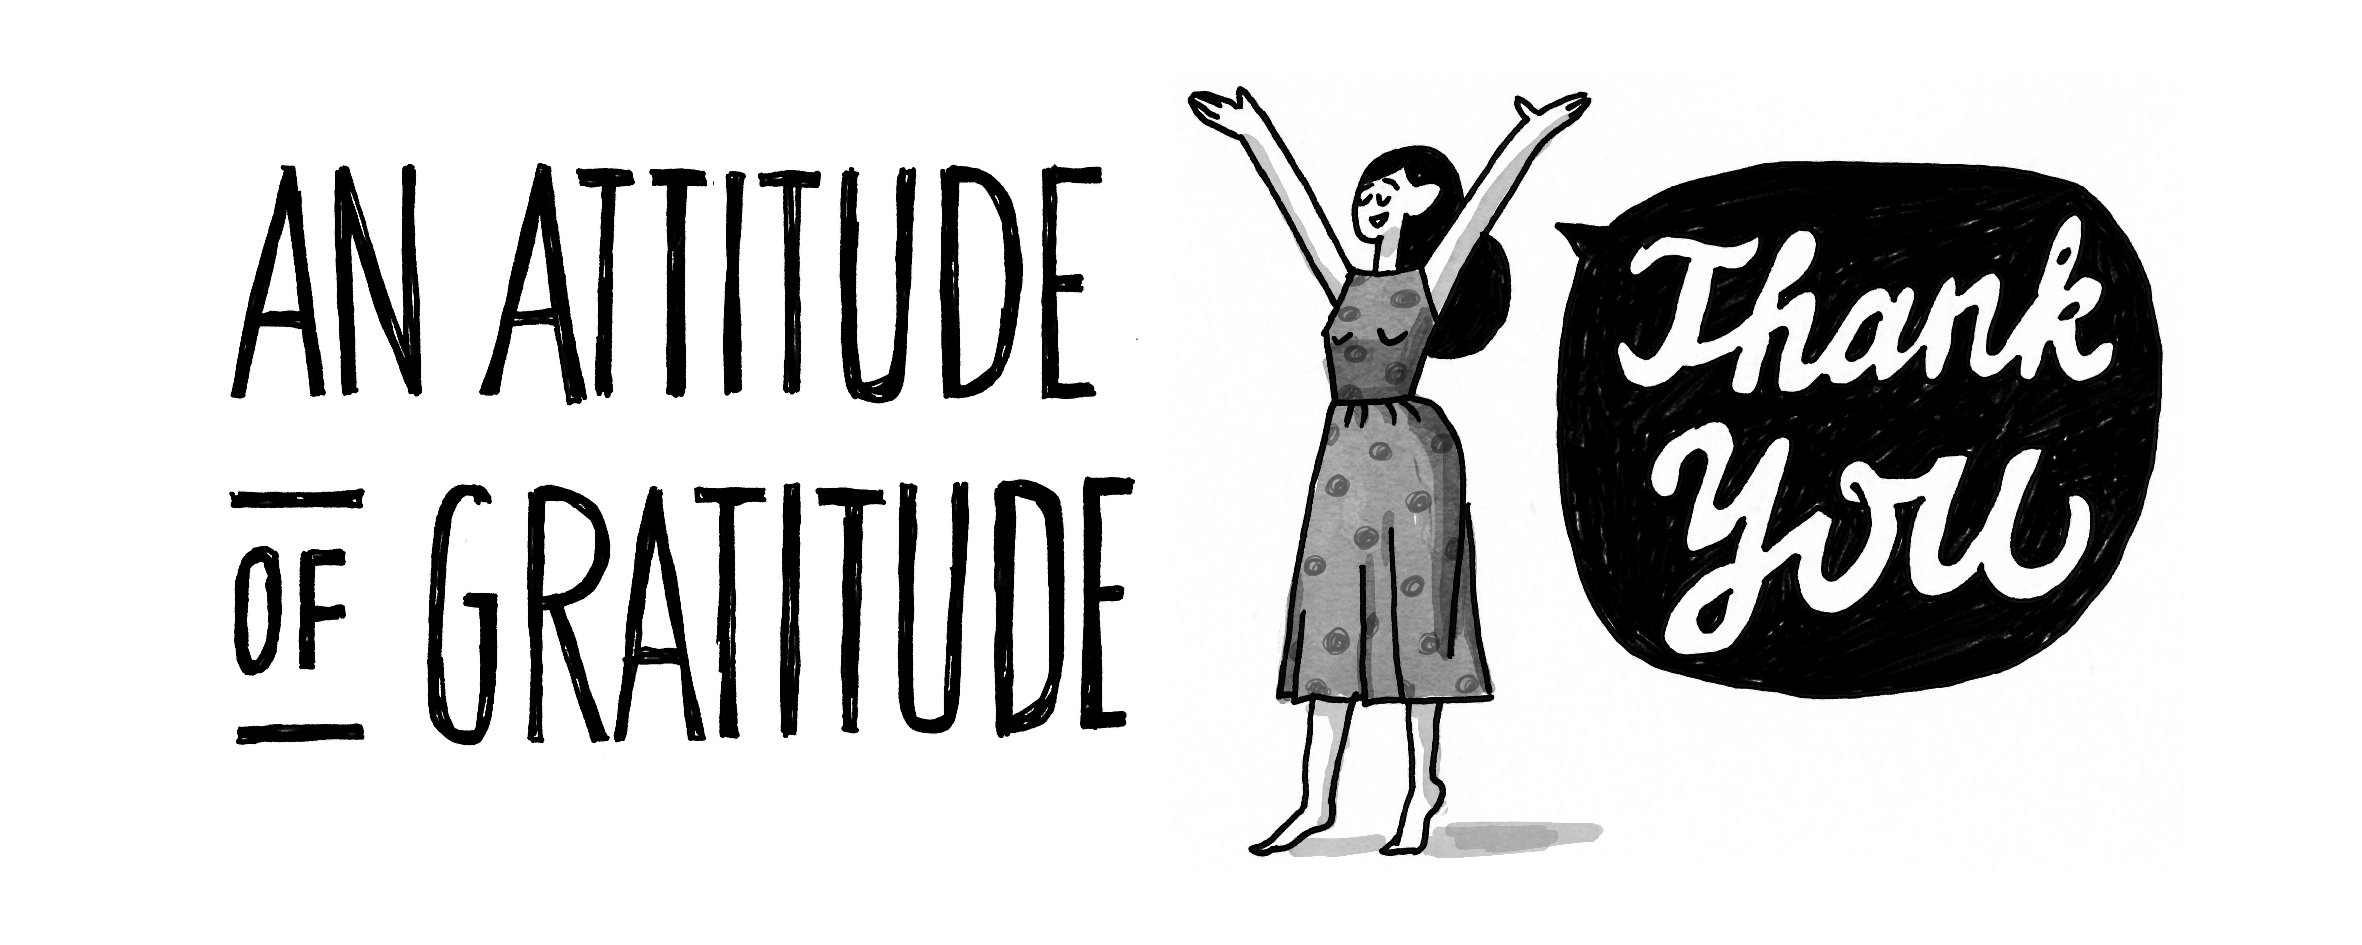 claire-turnbull-planner-illustration-attitude-gratitude-by-creative-people